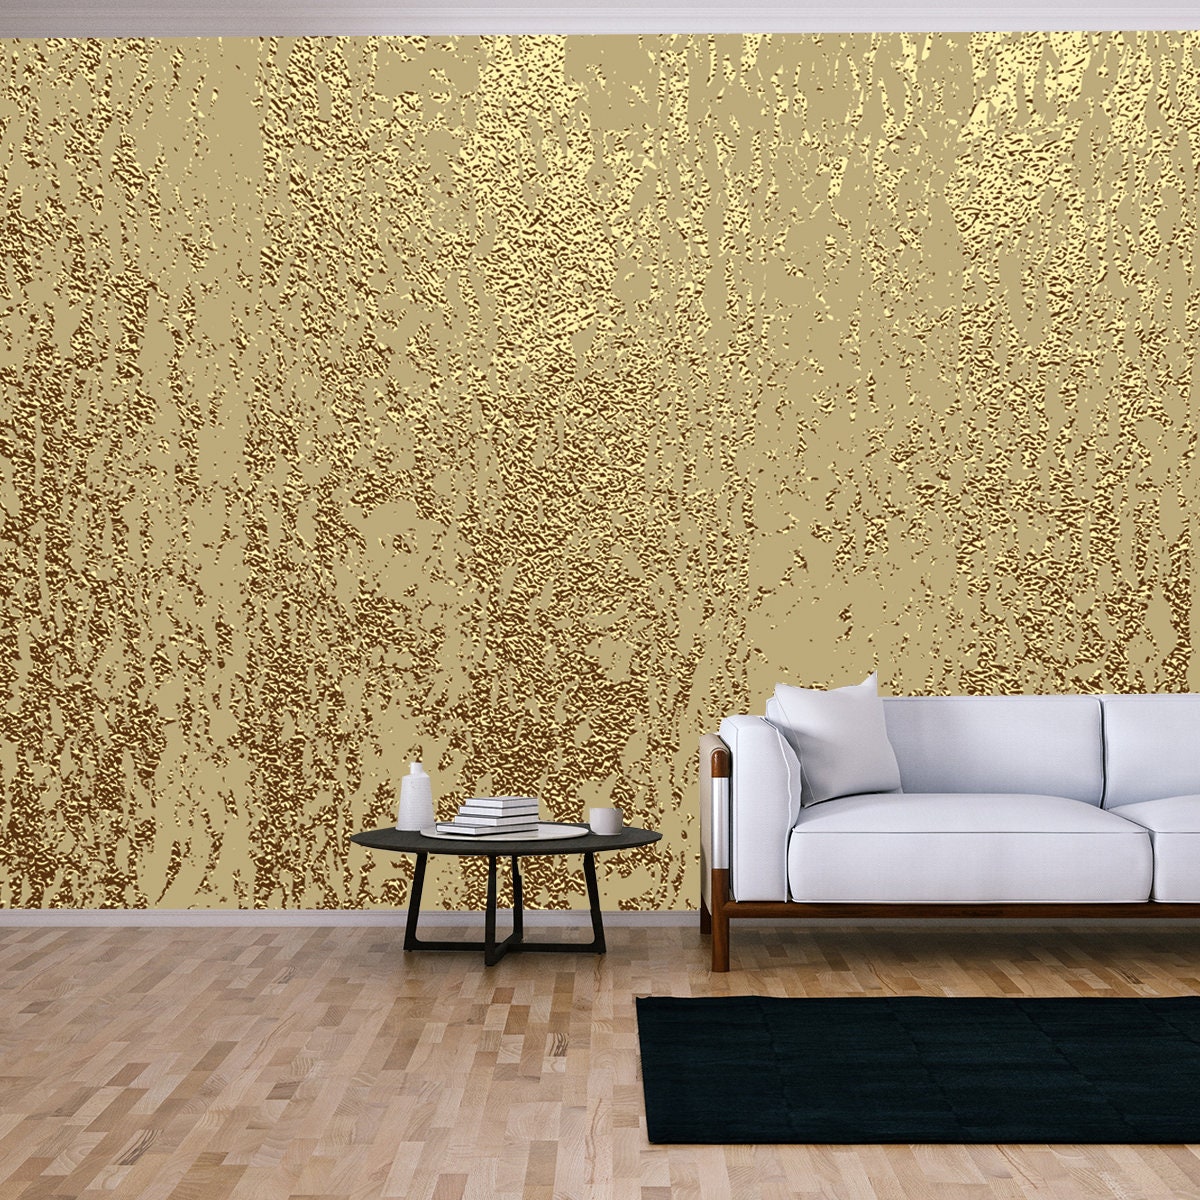 Gold Grunge Texture to Create Distressed Effect. Patina Scratch Golden Elements Wallpaper Living Room Mural